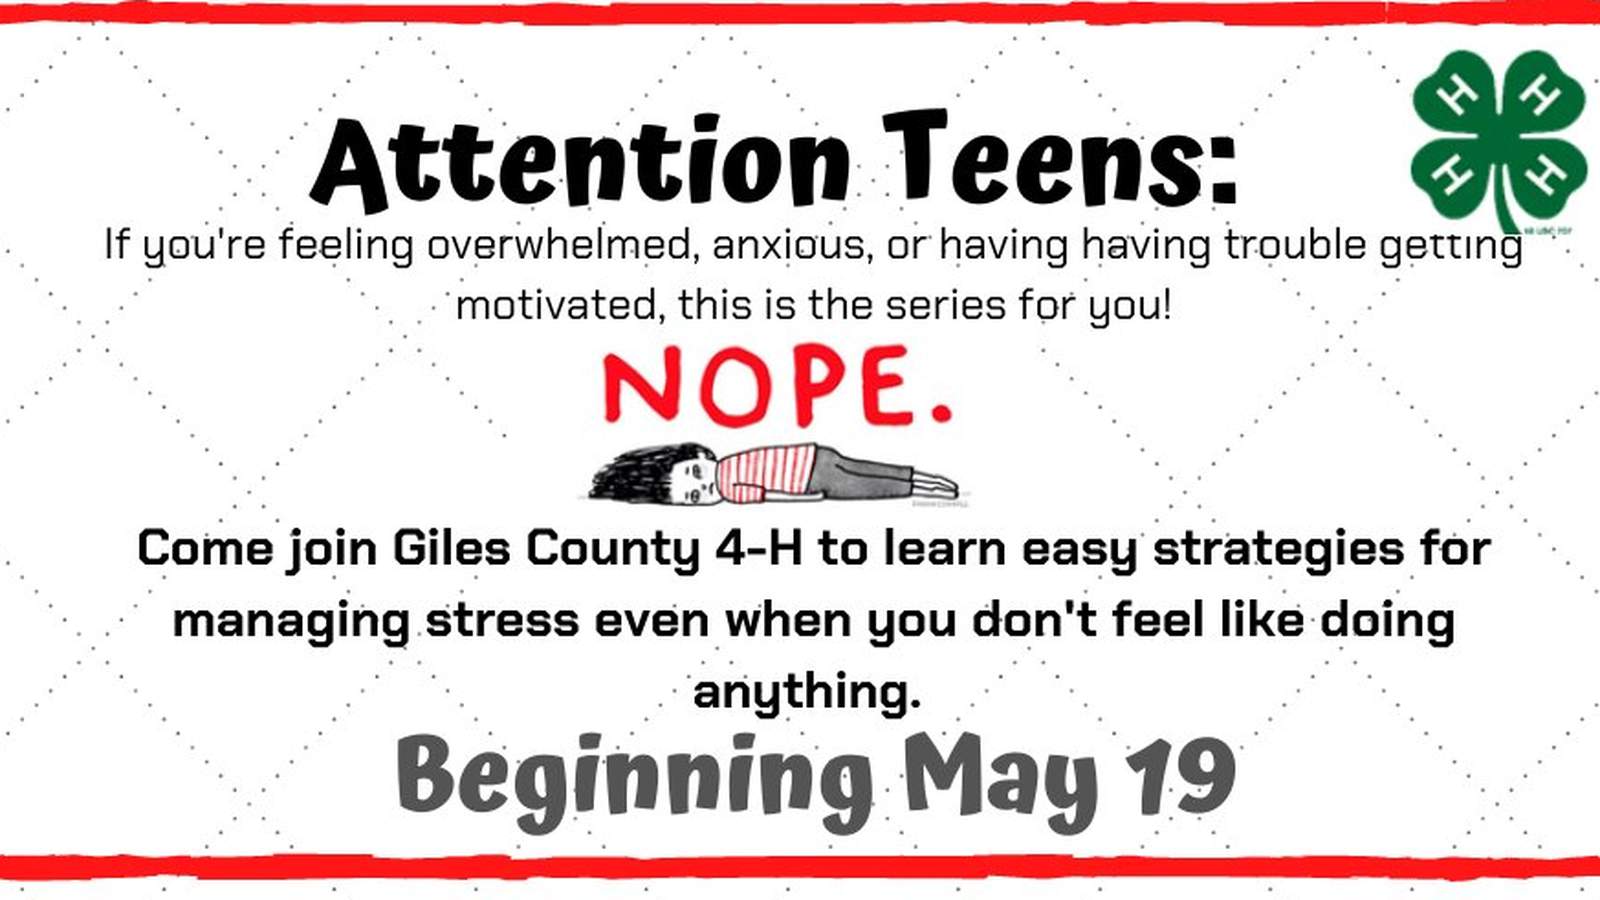 Giles County launches virtual program to help teens manage stress